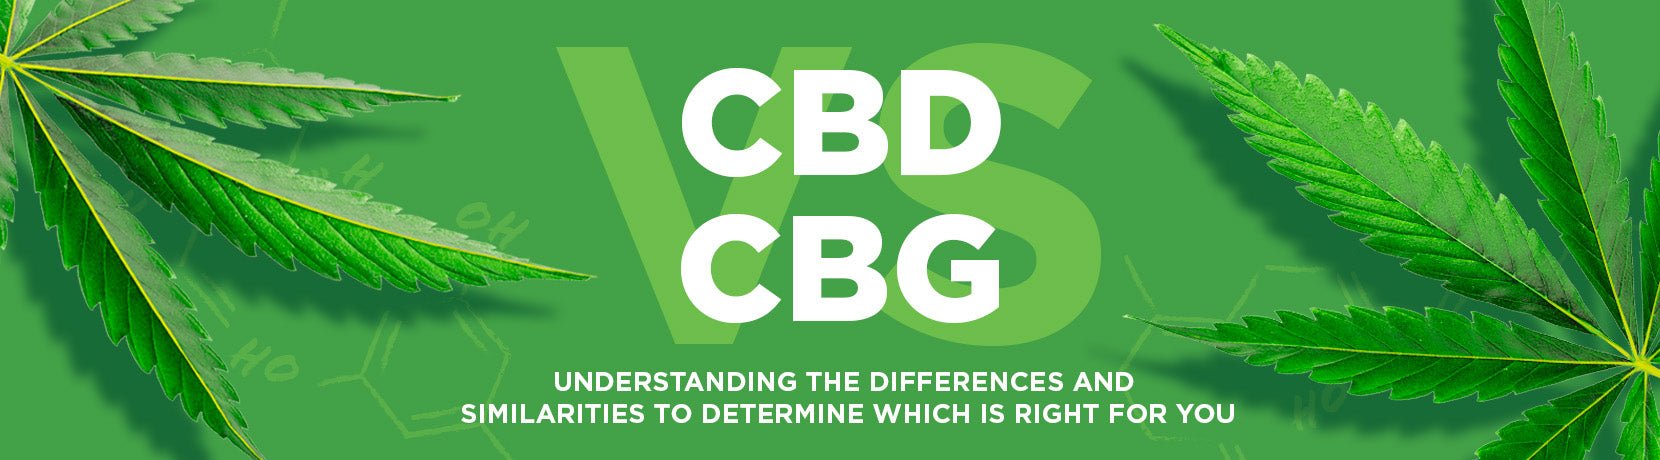 CBD vs CBG: Understanding the Differences and Similarities to Determine Which is Right for You - Shop CBD Kratom